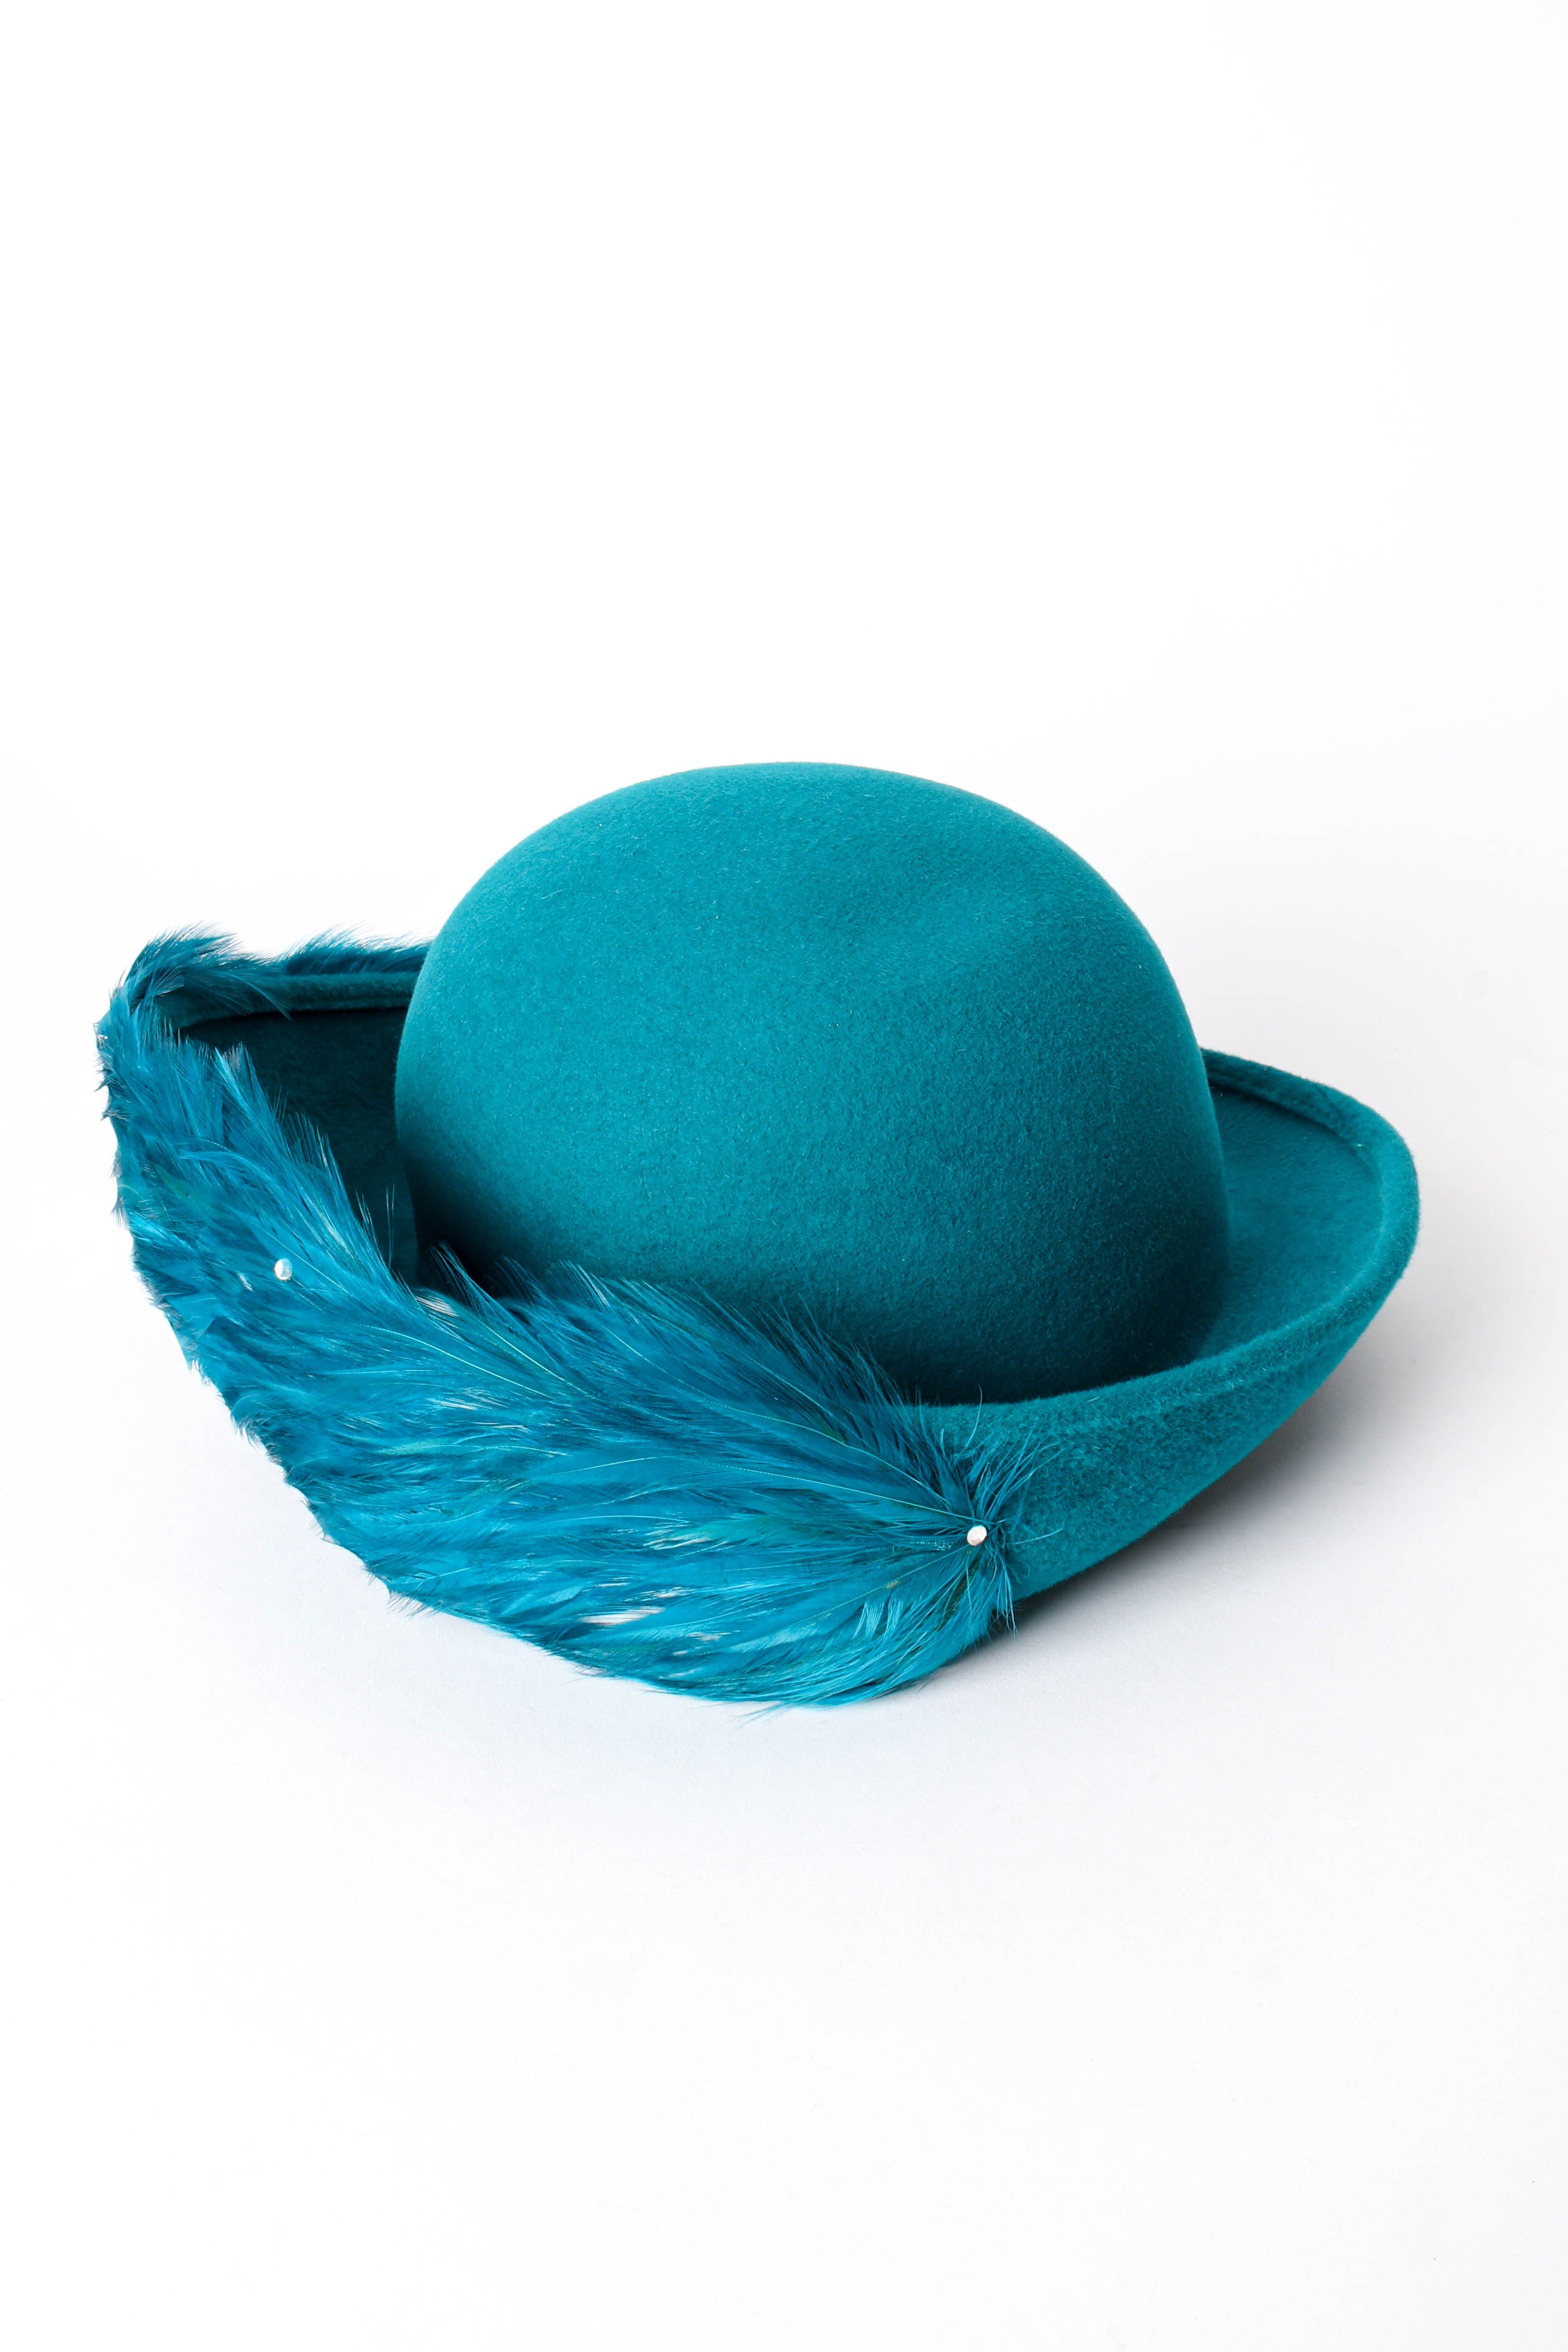 Vintage Mr. John Ombre Feather Bumper Hat freather crop at Recess Los Angeles